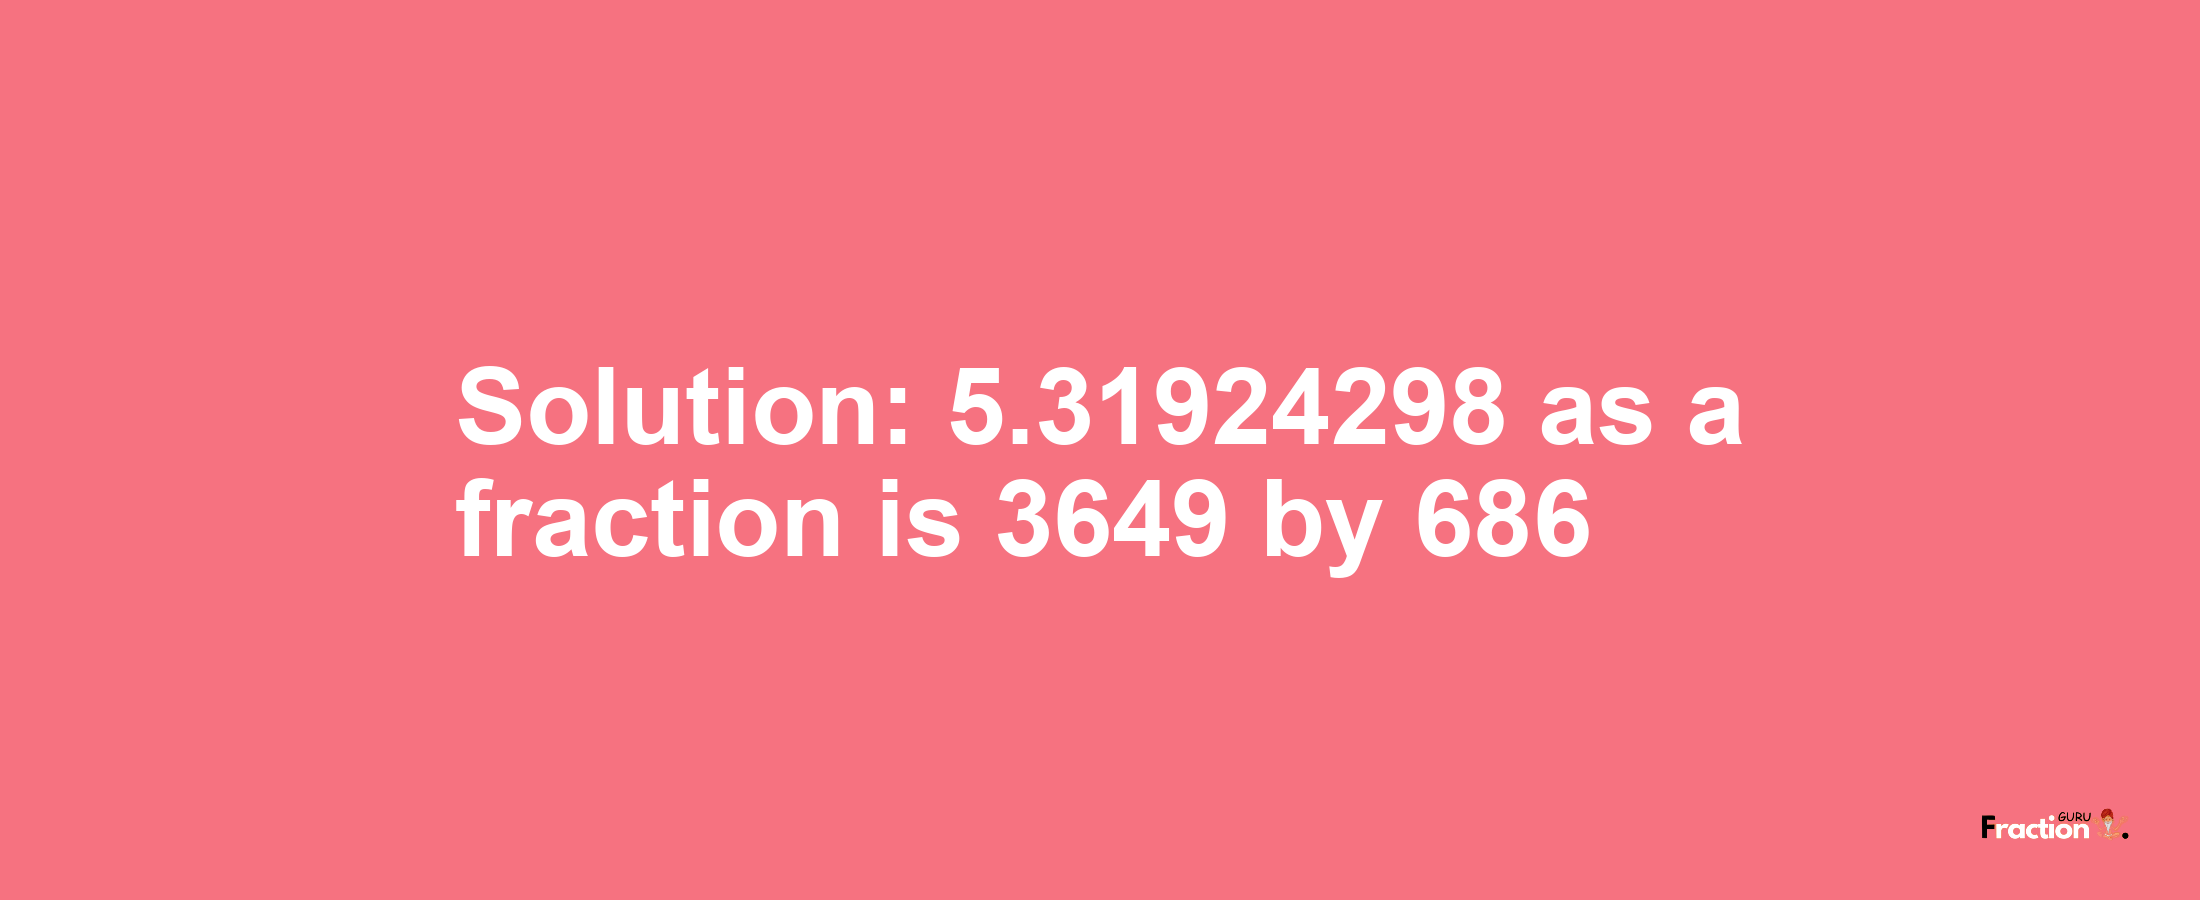 Solution:5.31924298 as a fraction is 3649/686